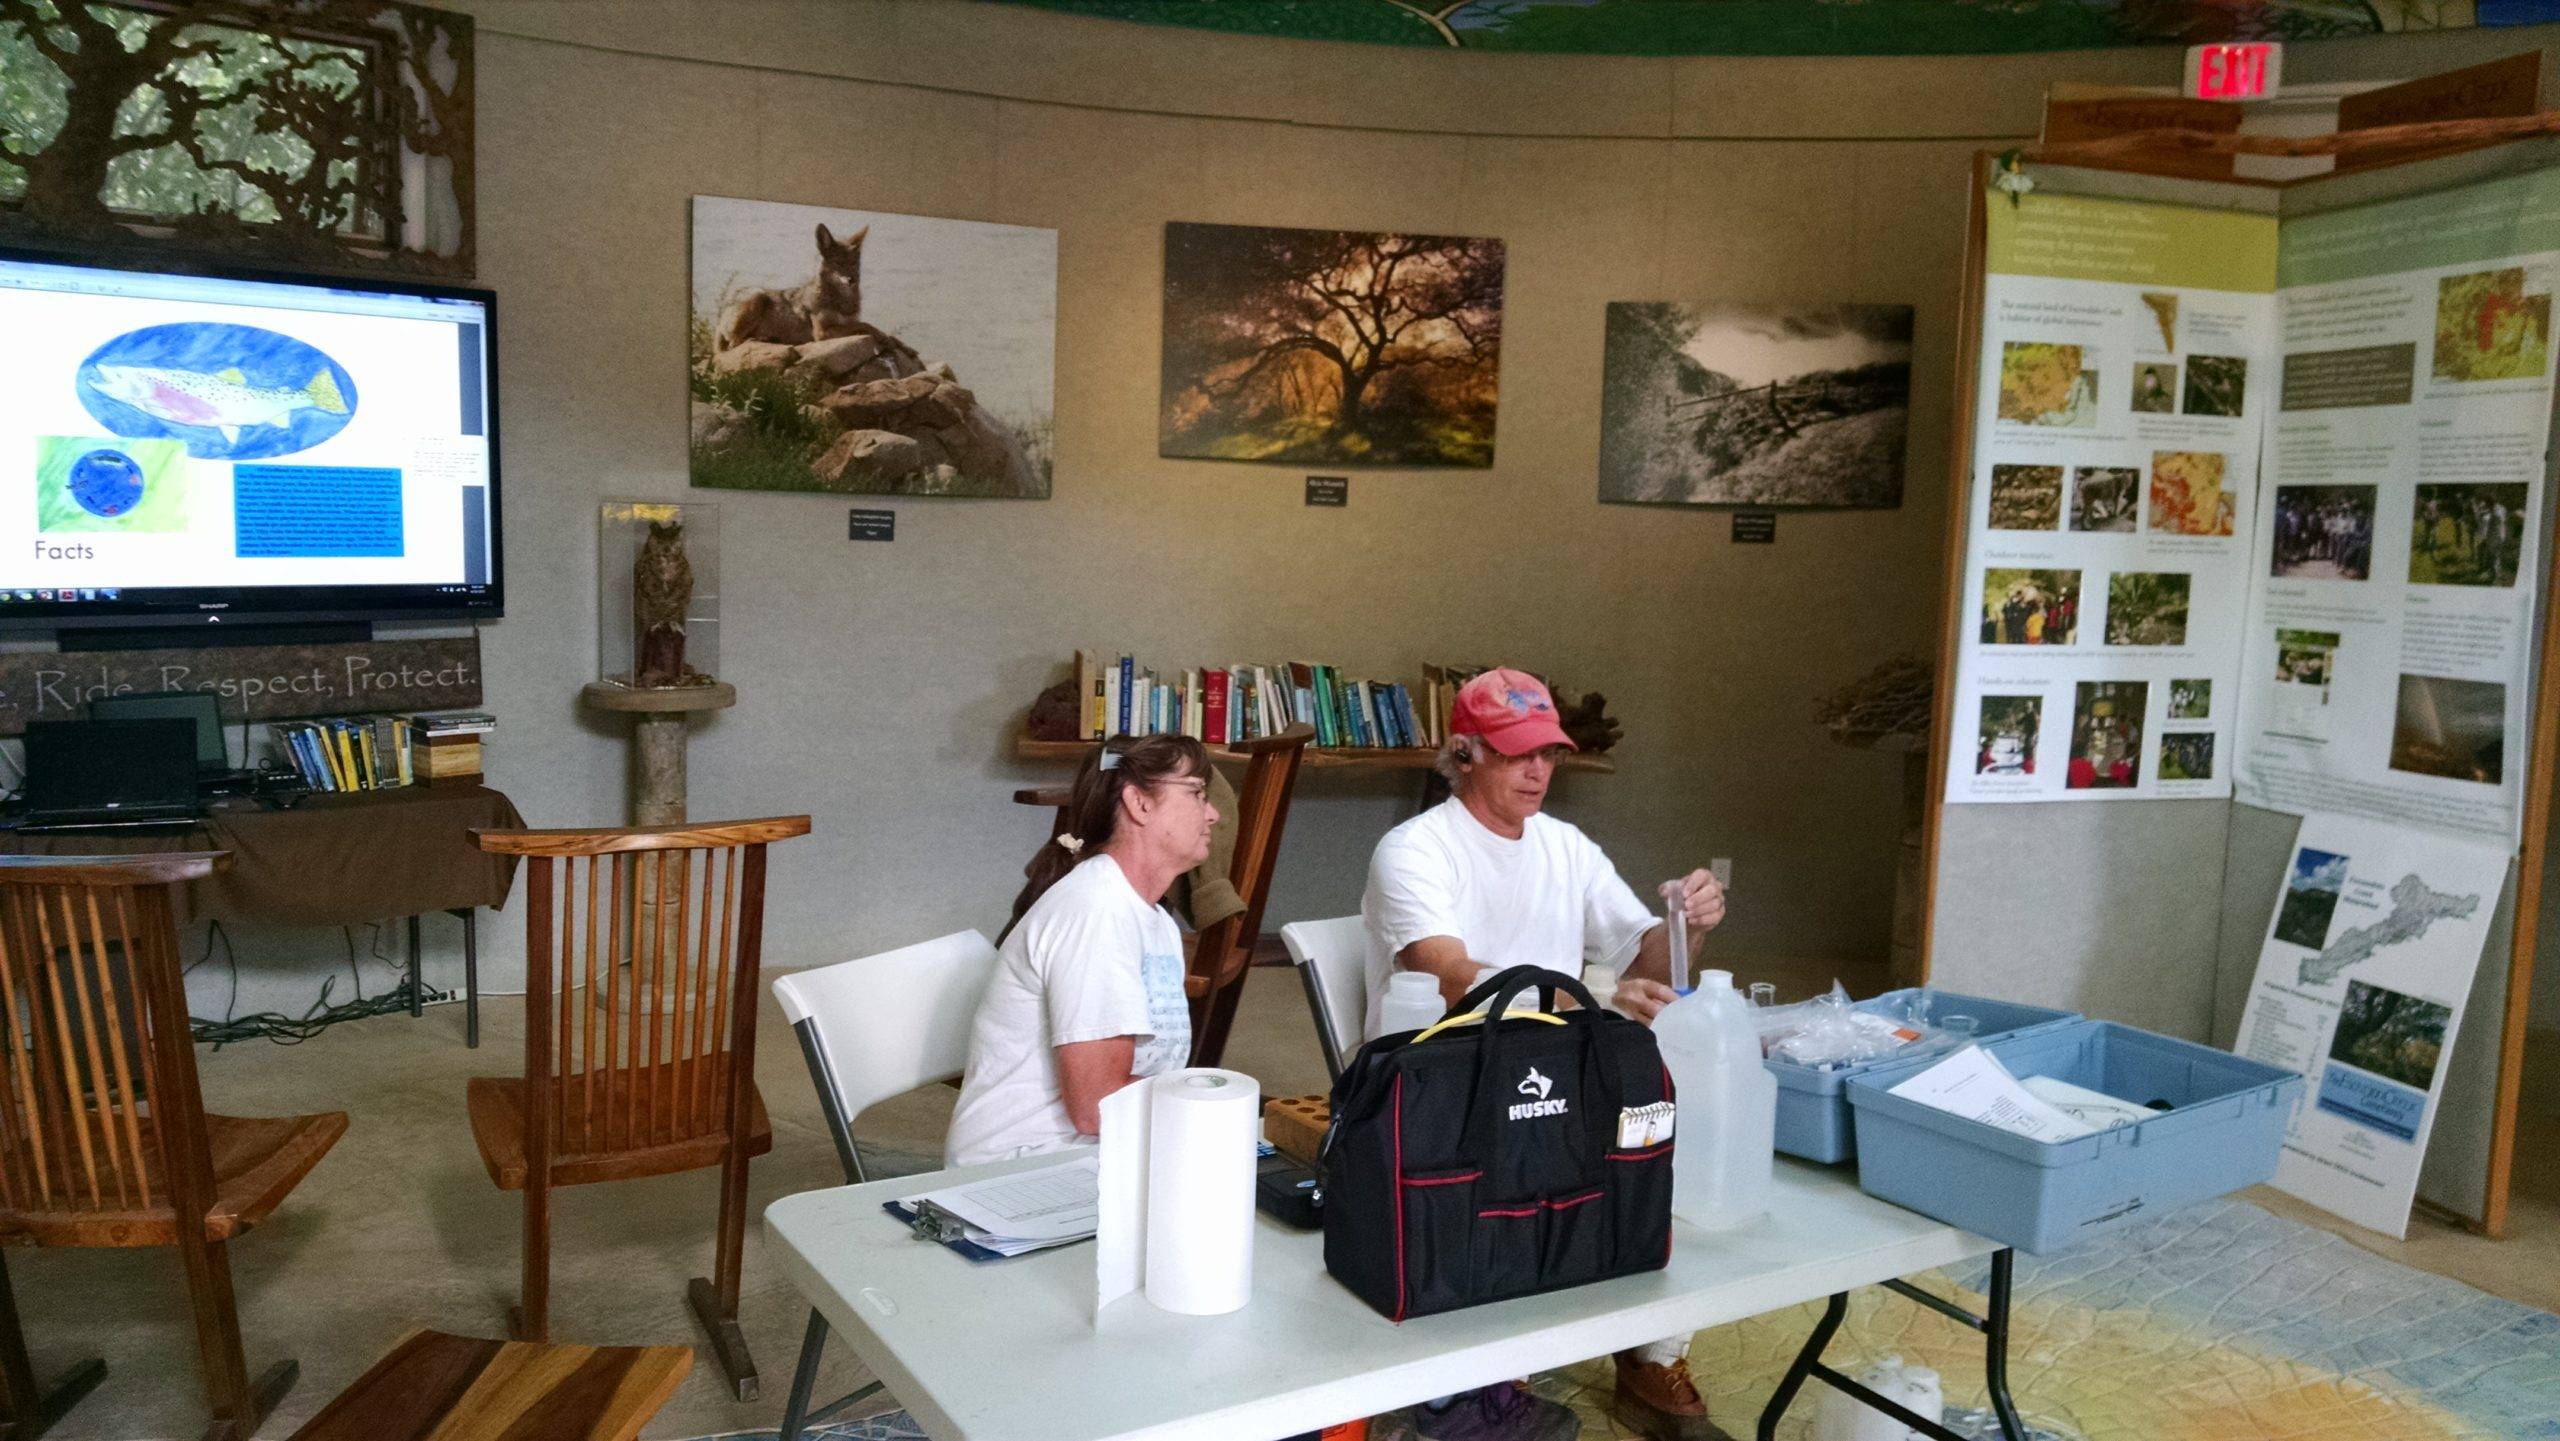 A man and a woman work with water quality testing tools at a card table in an environmental interpretive center.